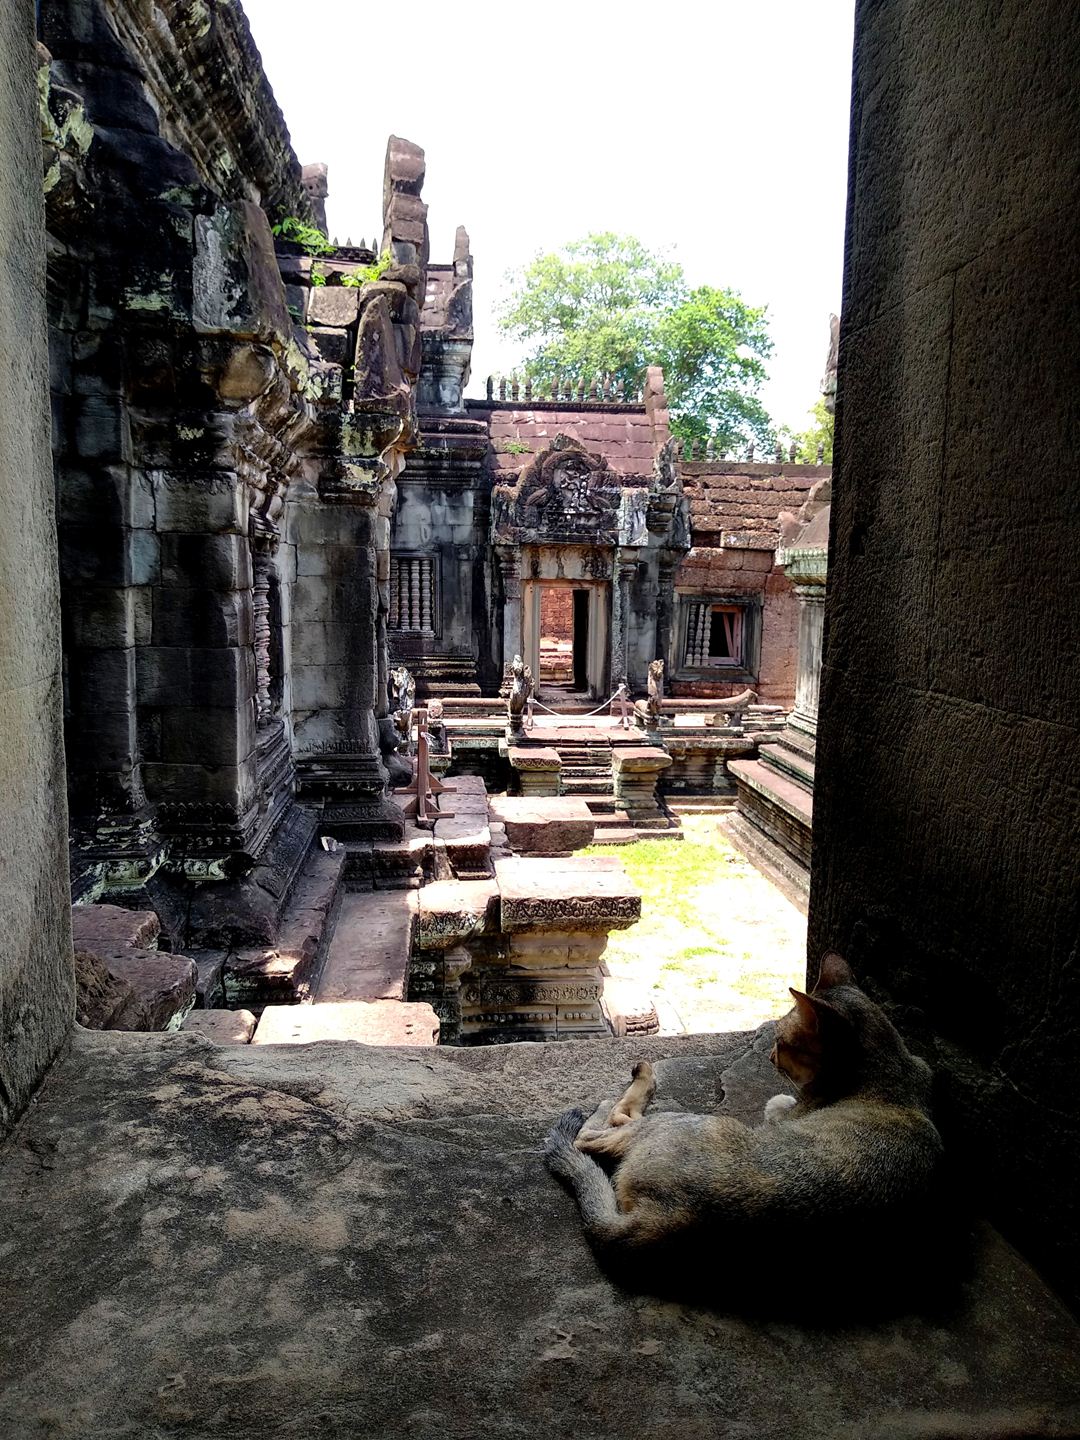 Banteay Samre temple, Cambodia. Now with cat!